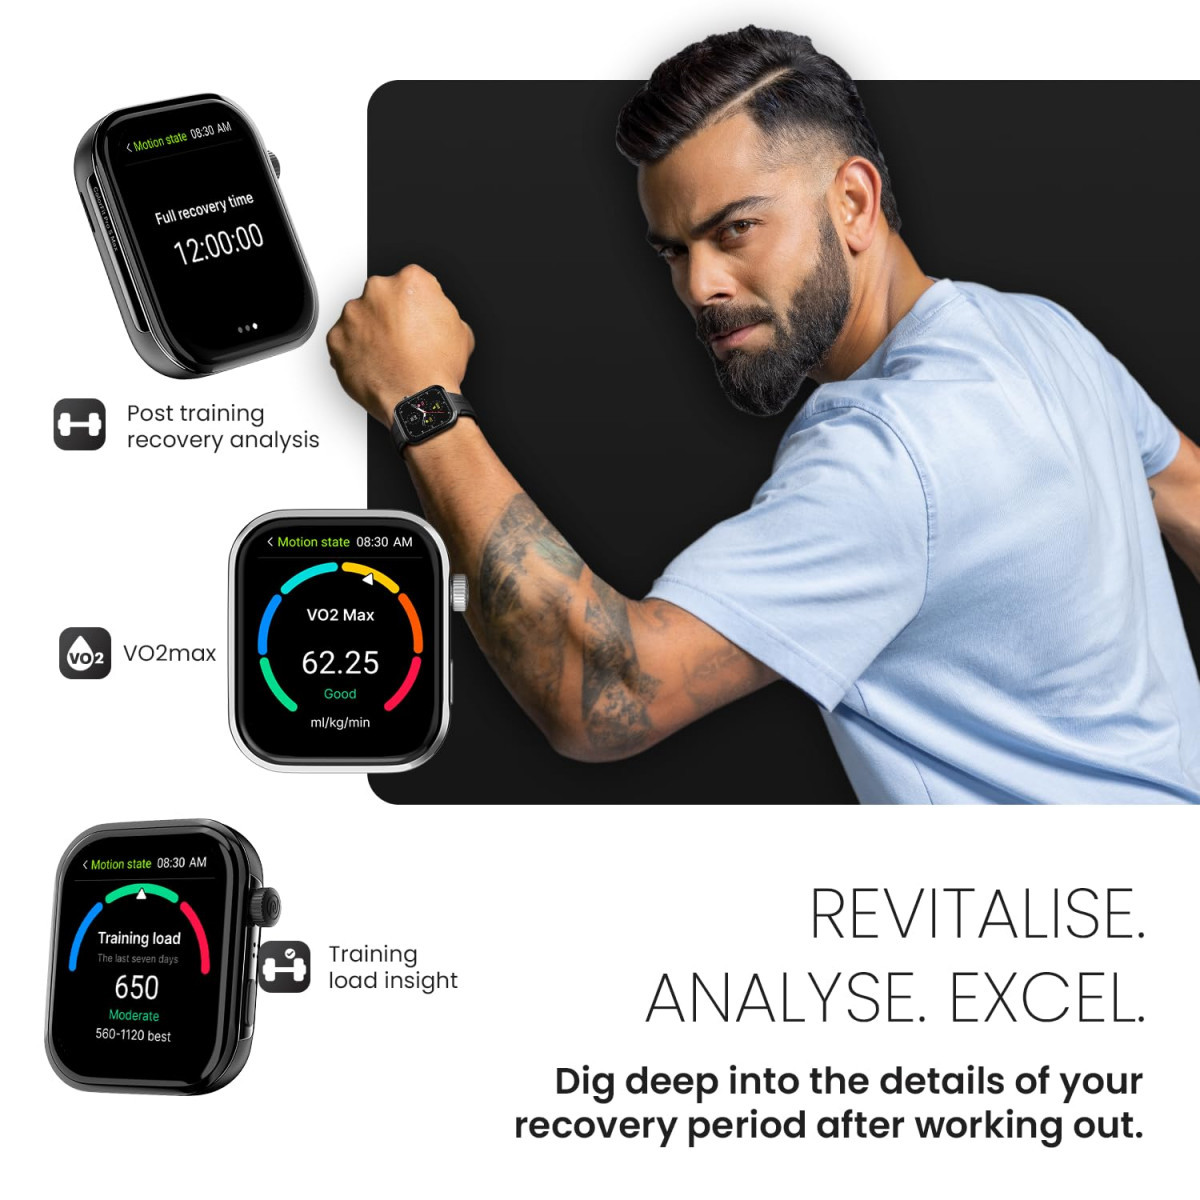 Noise Newly Launched ColorFit Pro 5 Max 196 AMOLED Display Smart Watch BT Calling